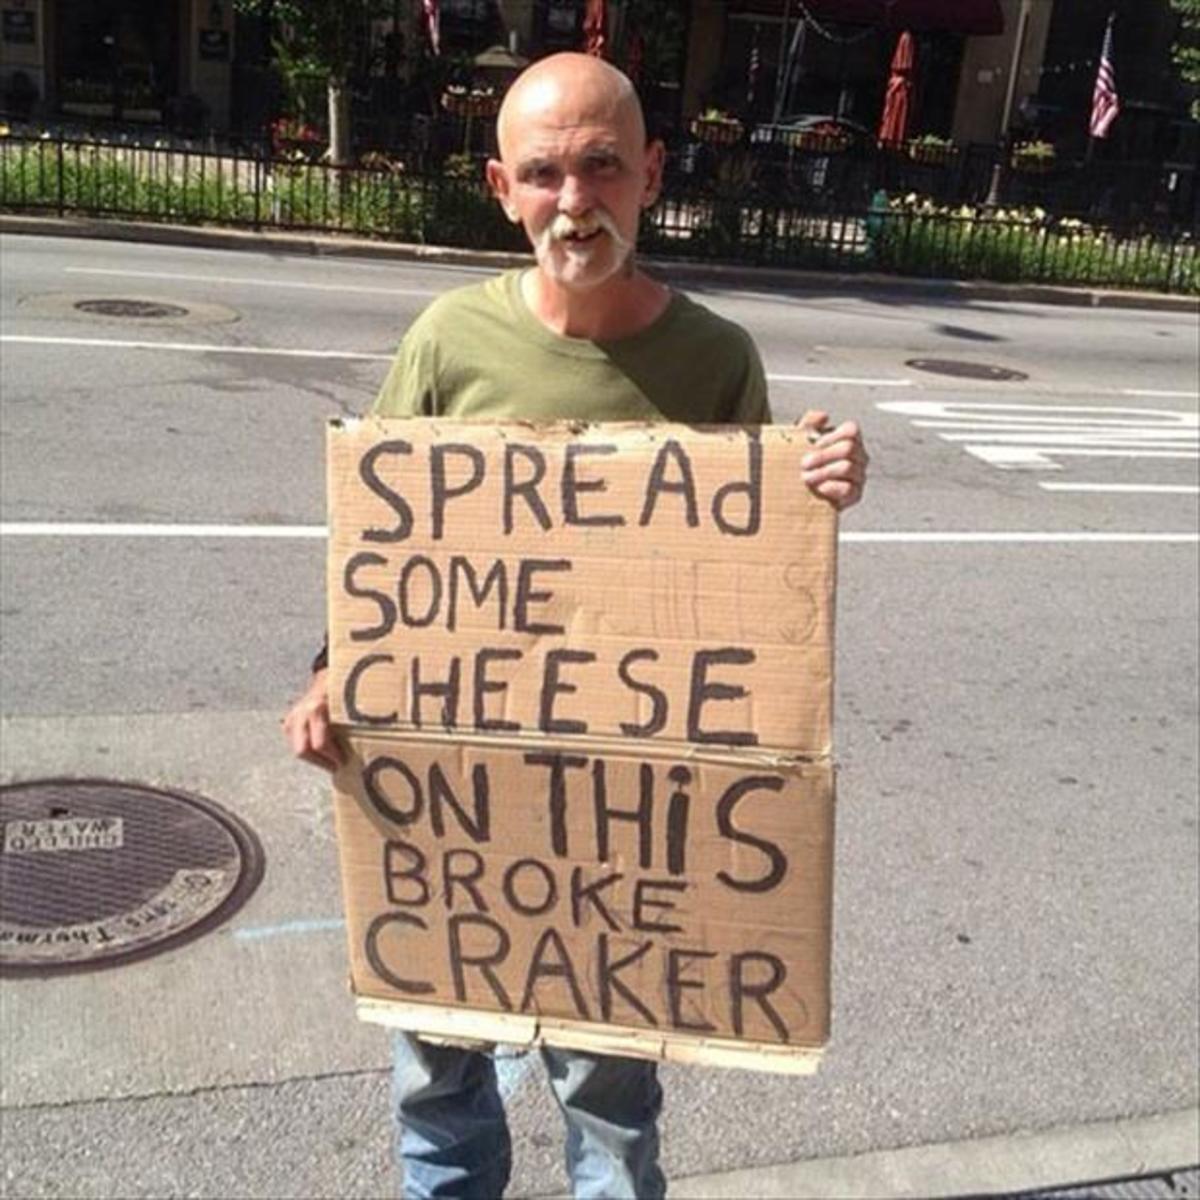 Spread some cheese on this broke craker